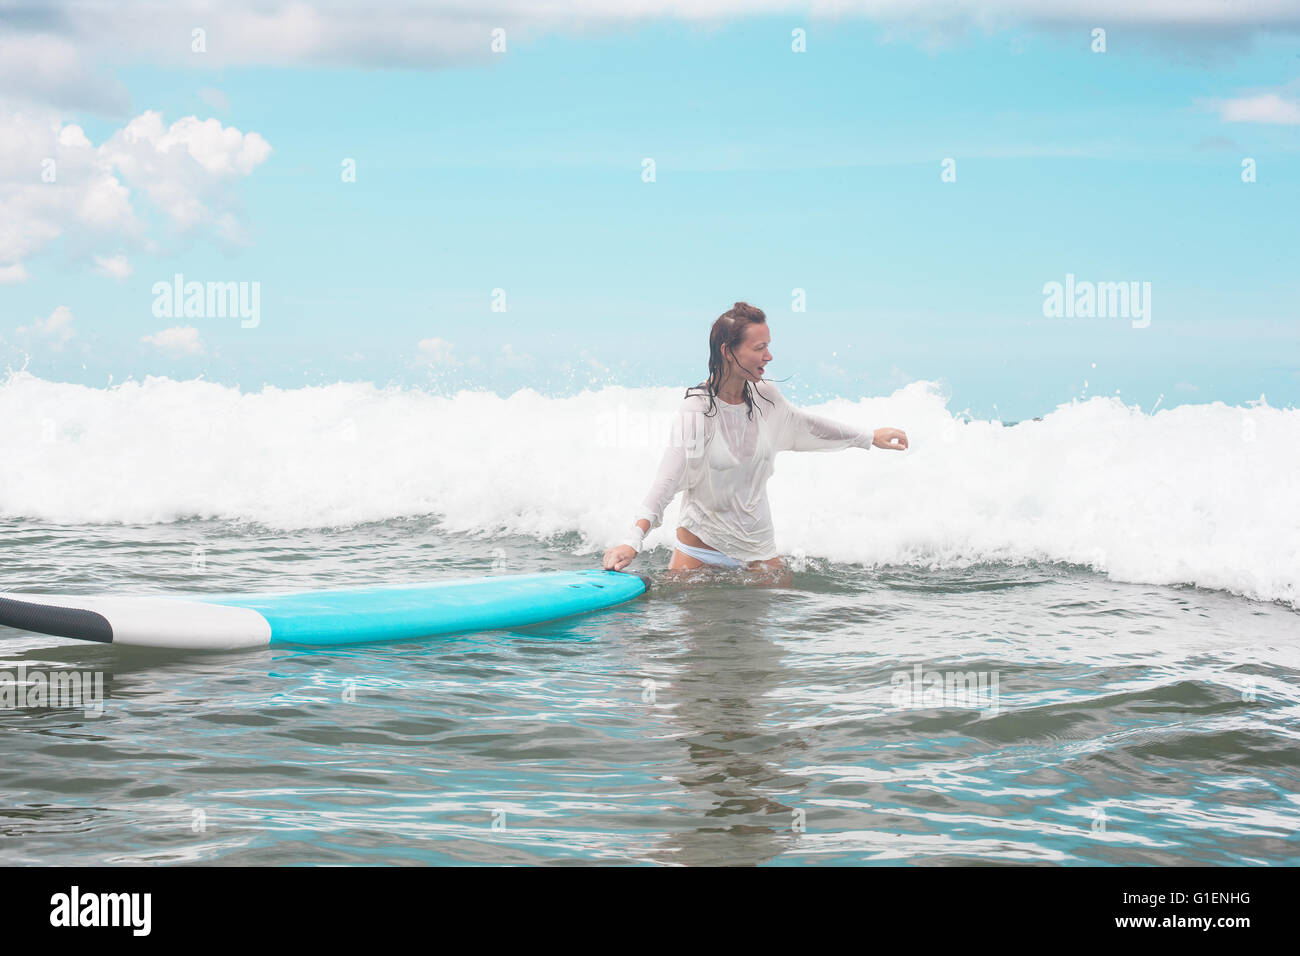 Girl on the waves with surfboard. Stock Photo